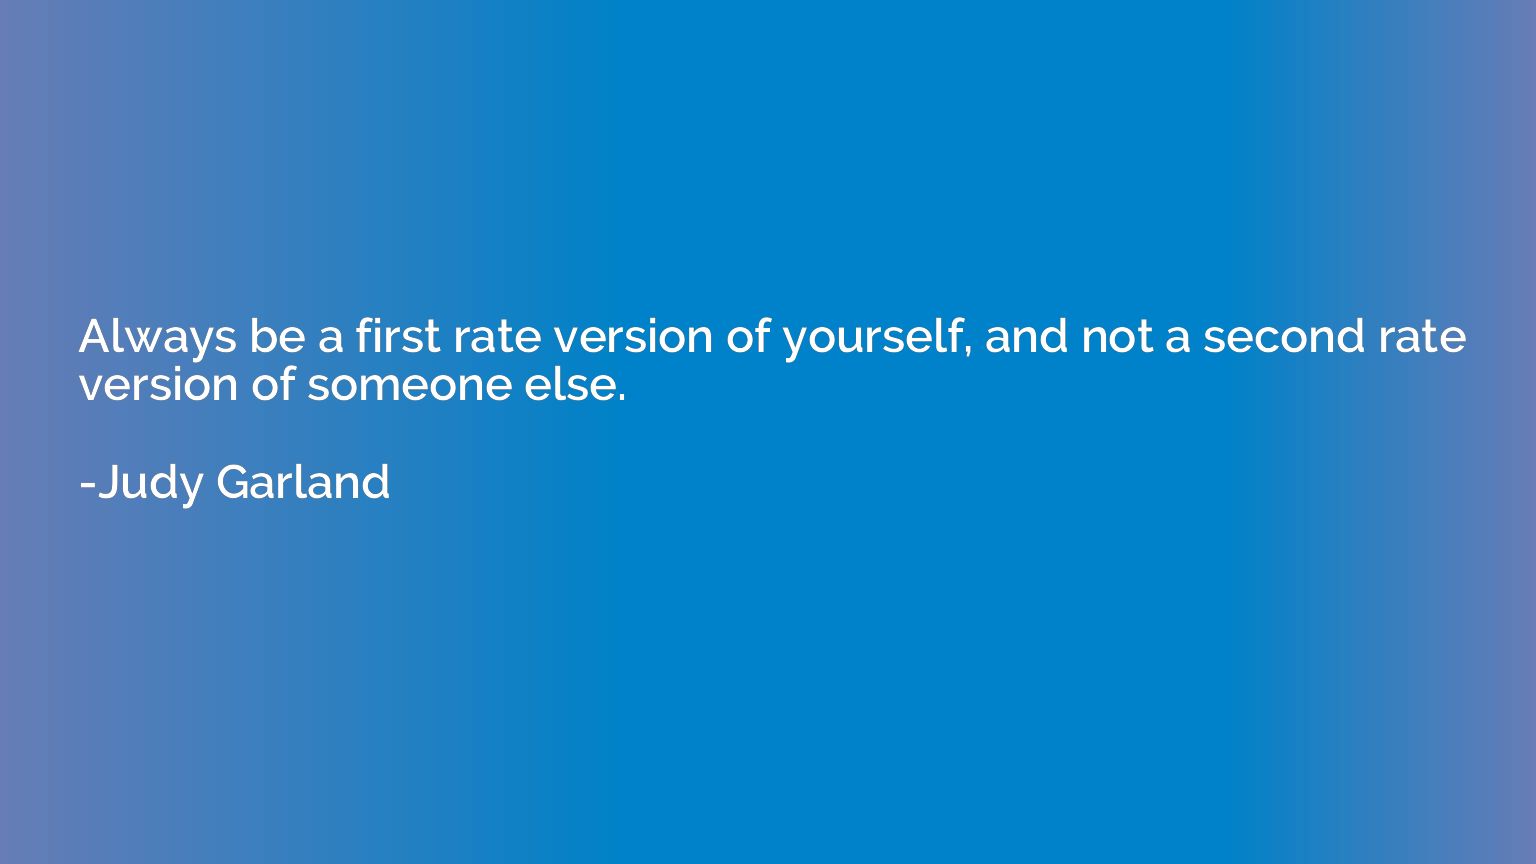 Always be a first rate version of yourself, and not a second